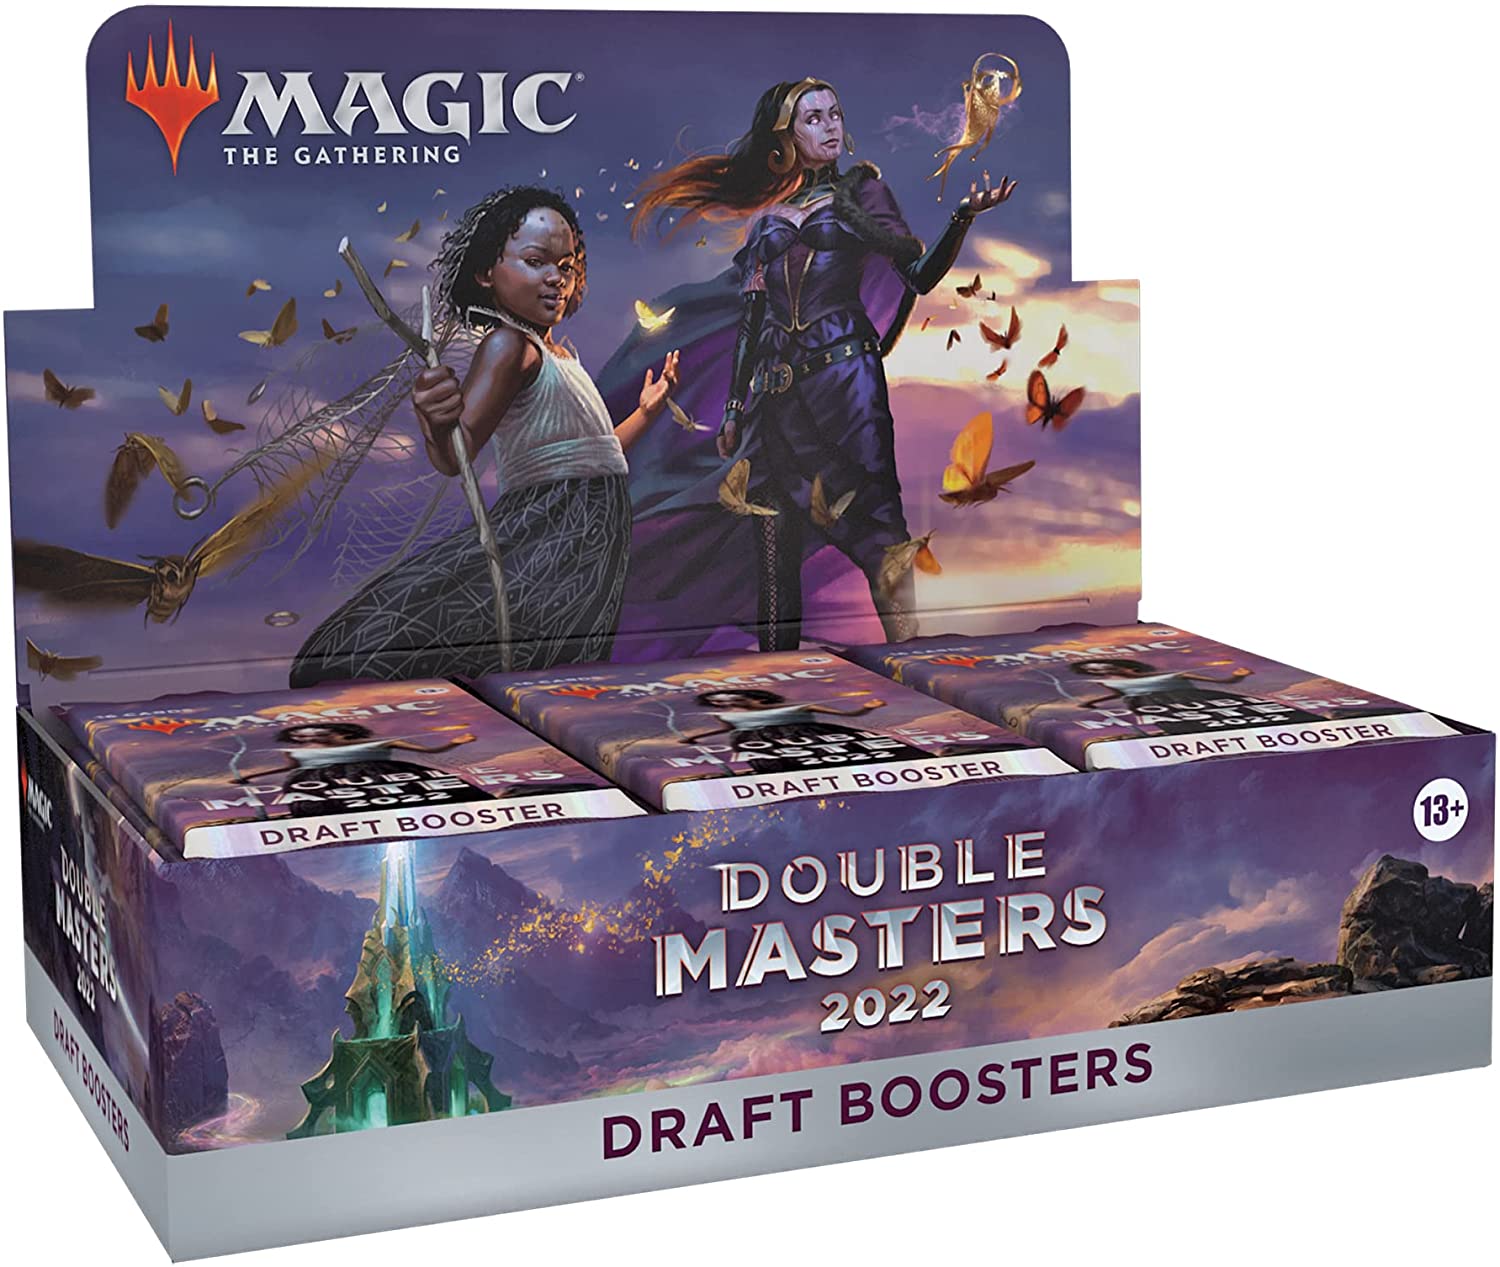 Magic: Double Masters 2022 - Draft Boosterbox